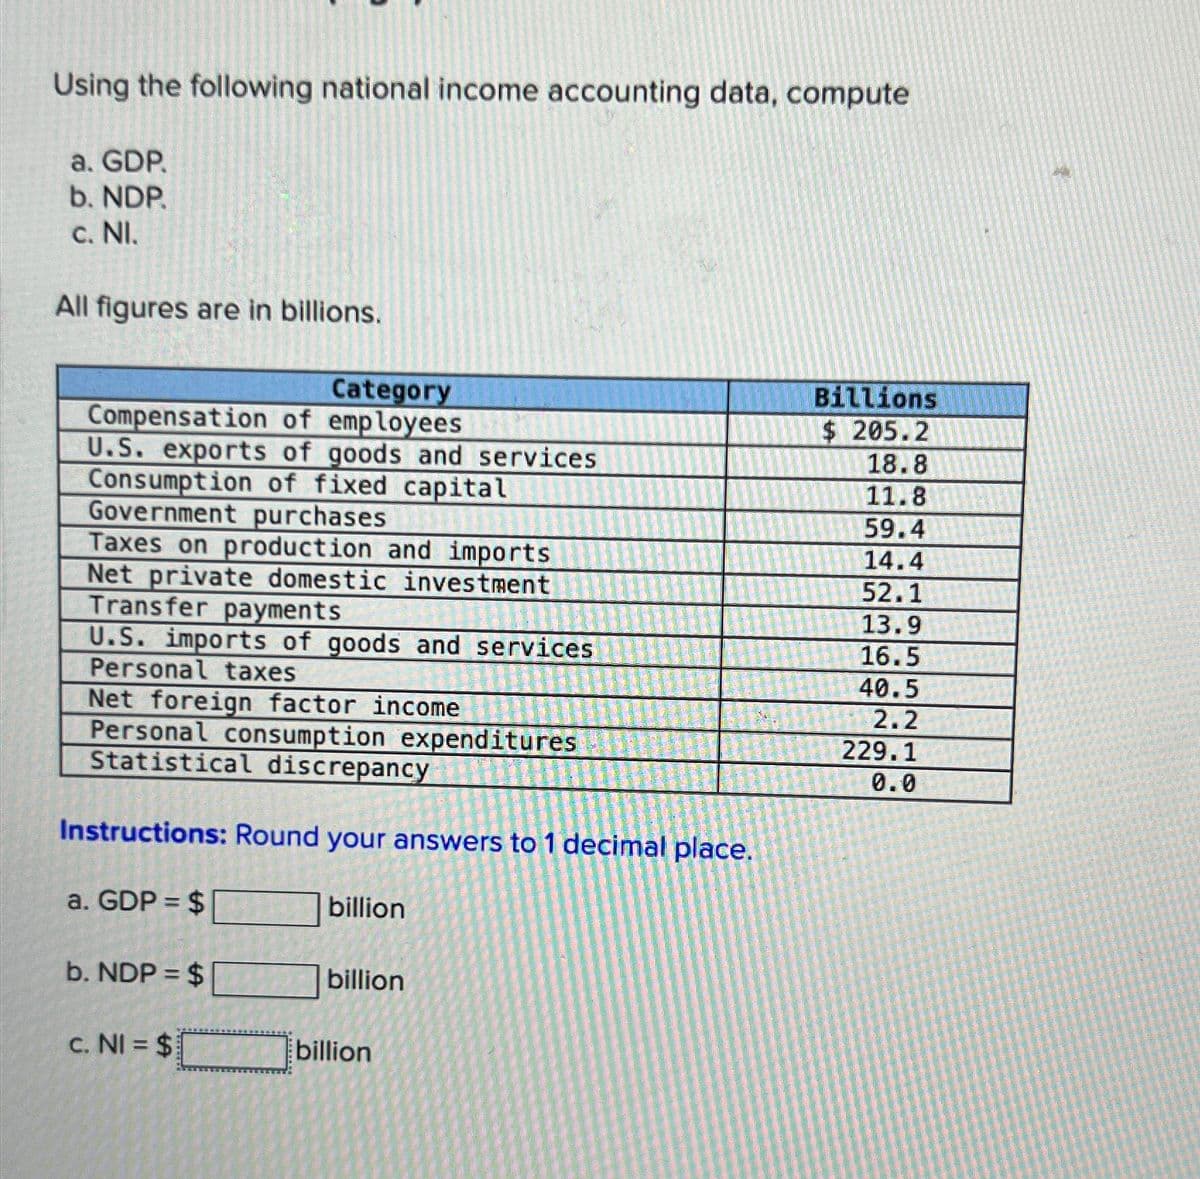 Using the following national income accounting data, compute
a. GDP.
b. NDP.
c. NI.
All figures are in billions.
Category
Compensation of employees
Billions
$ 205.2
U.S. exports of goods and services
18.8
Consumption of fixed capital
11.8
Government purchases
59.4
Taxes on production and imports
14.4
Net private domestic investment
52.1
Transfer payments
13.9
U.S. imports of goods and services
16.5
Personal taxes
40.5
Net foreign factor income
2.2
Personal consumption expenditures
229.1
Statistical discrepancy
0.0
Instructions: Round your answers to 1 decimal place.
a. GDP = $
billion
b. NDP = $
billion
c. NI = $
billion